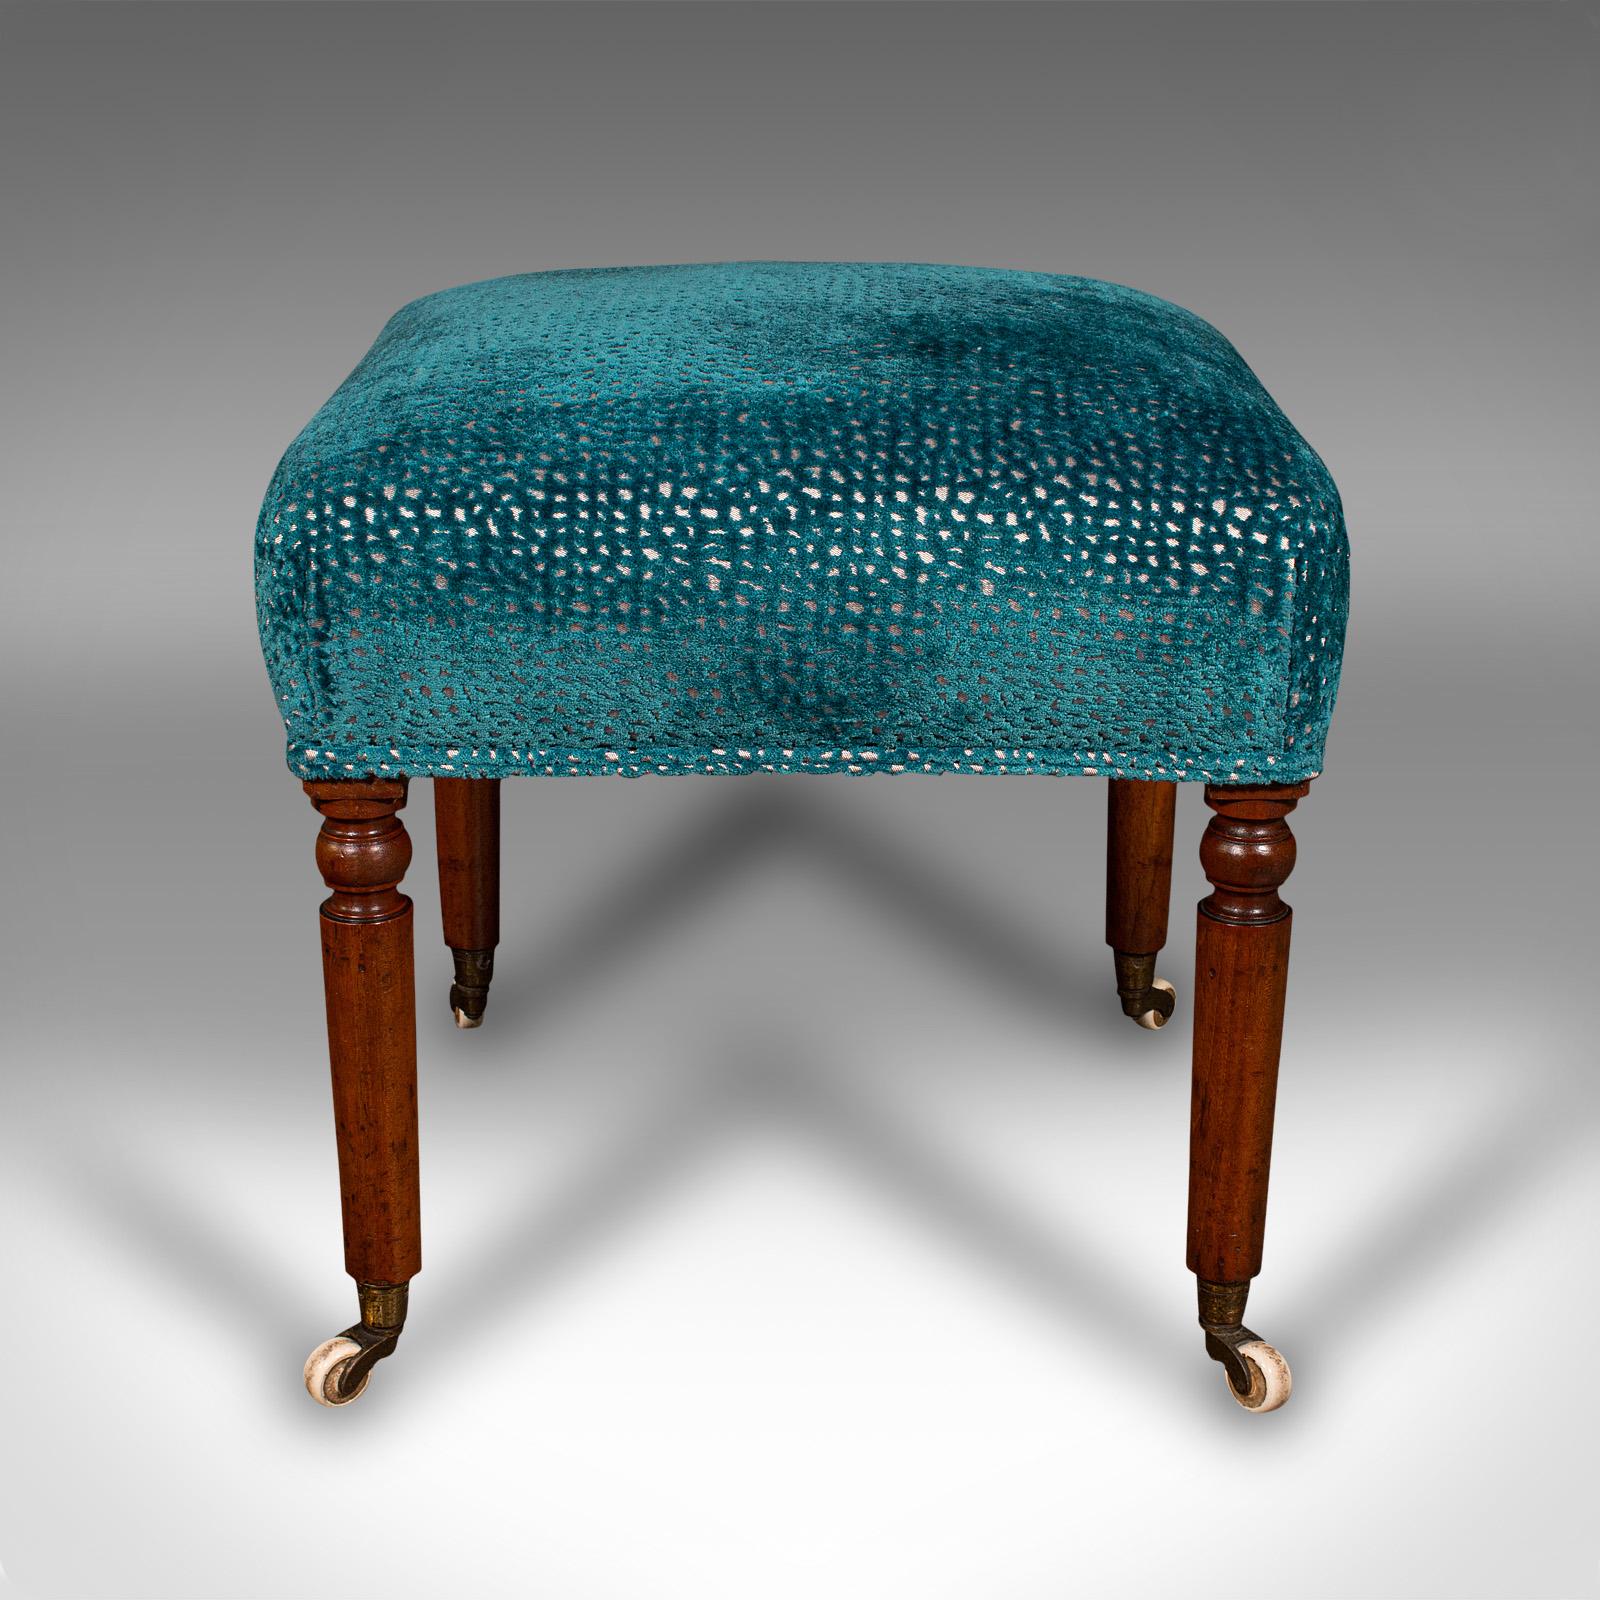 Antique Dressing Stool, English, Chenille Upholstery, Footstool, Regency, C.1820 In Good Condition For Sale In Hele, Devon, GB